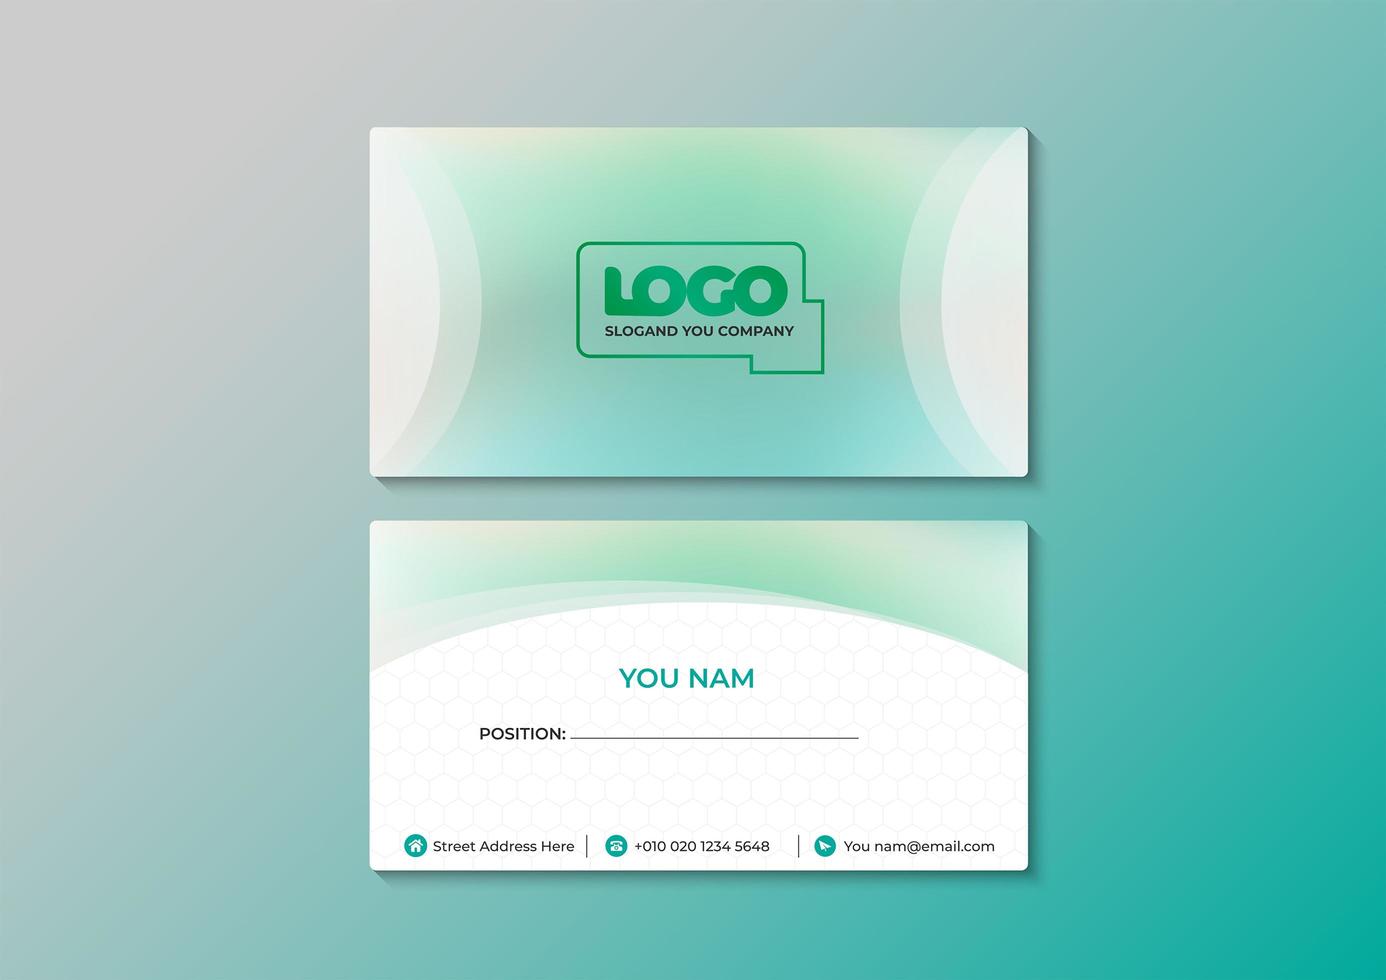 Soft curved design company id card template vector